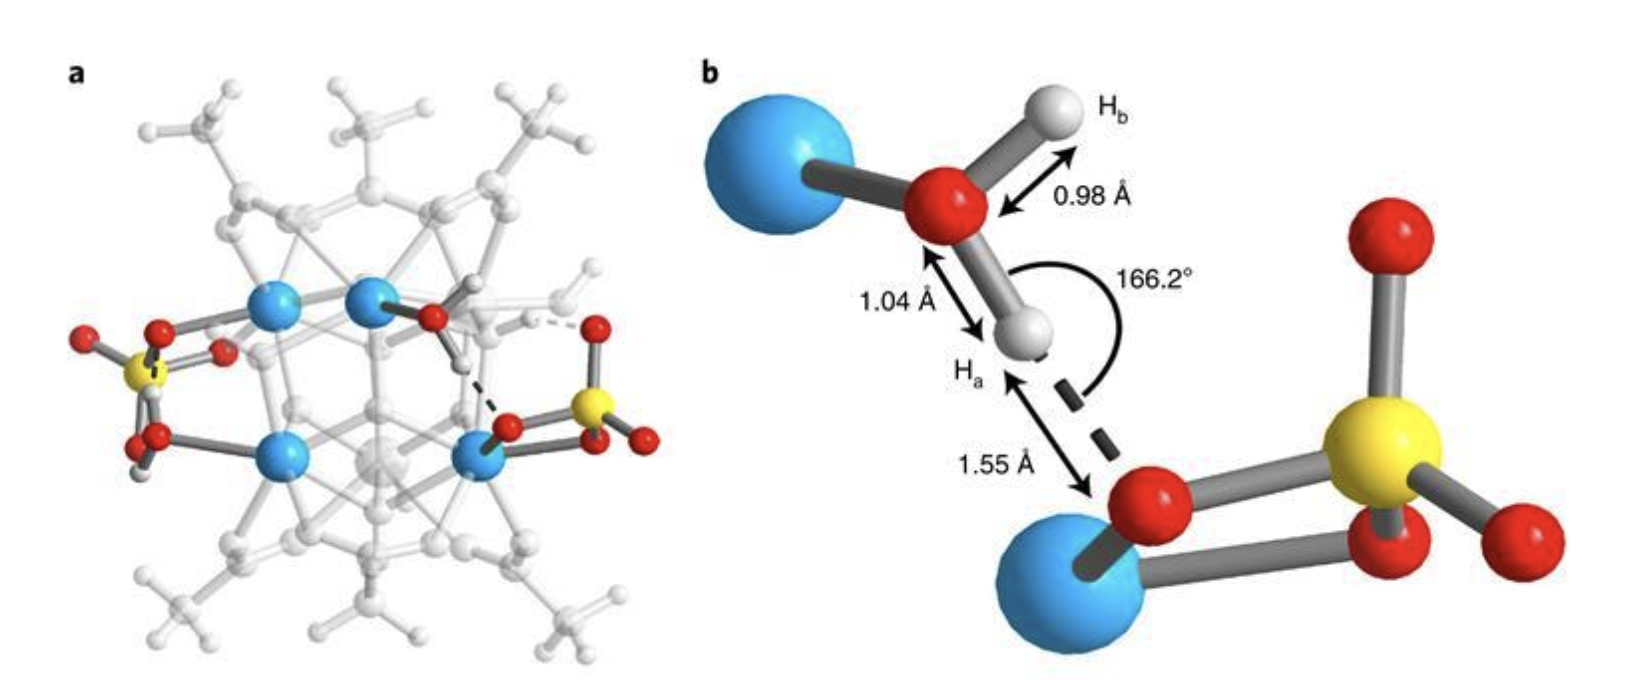 Depiction of the zirconium cluster and Brønsted acid site in MOF-808-SO4